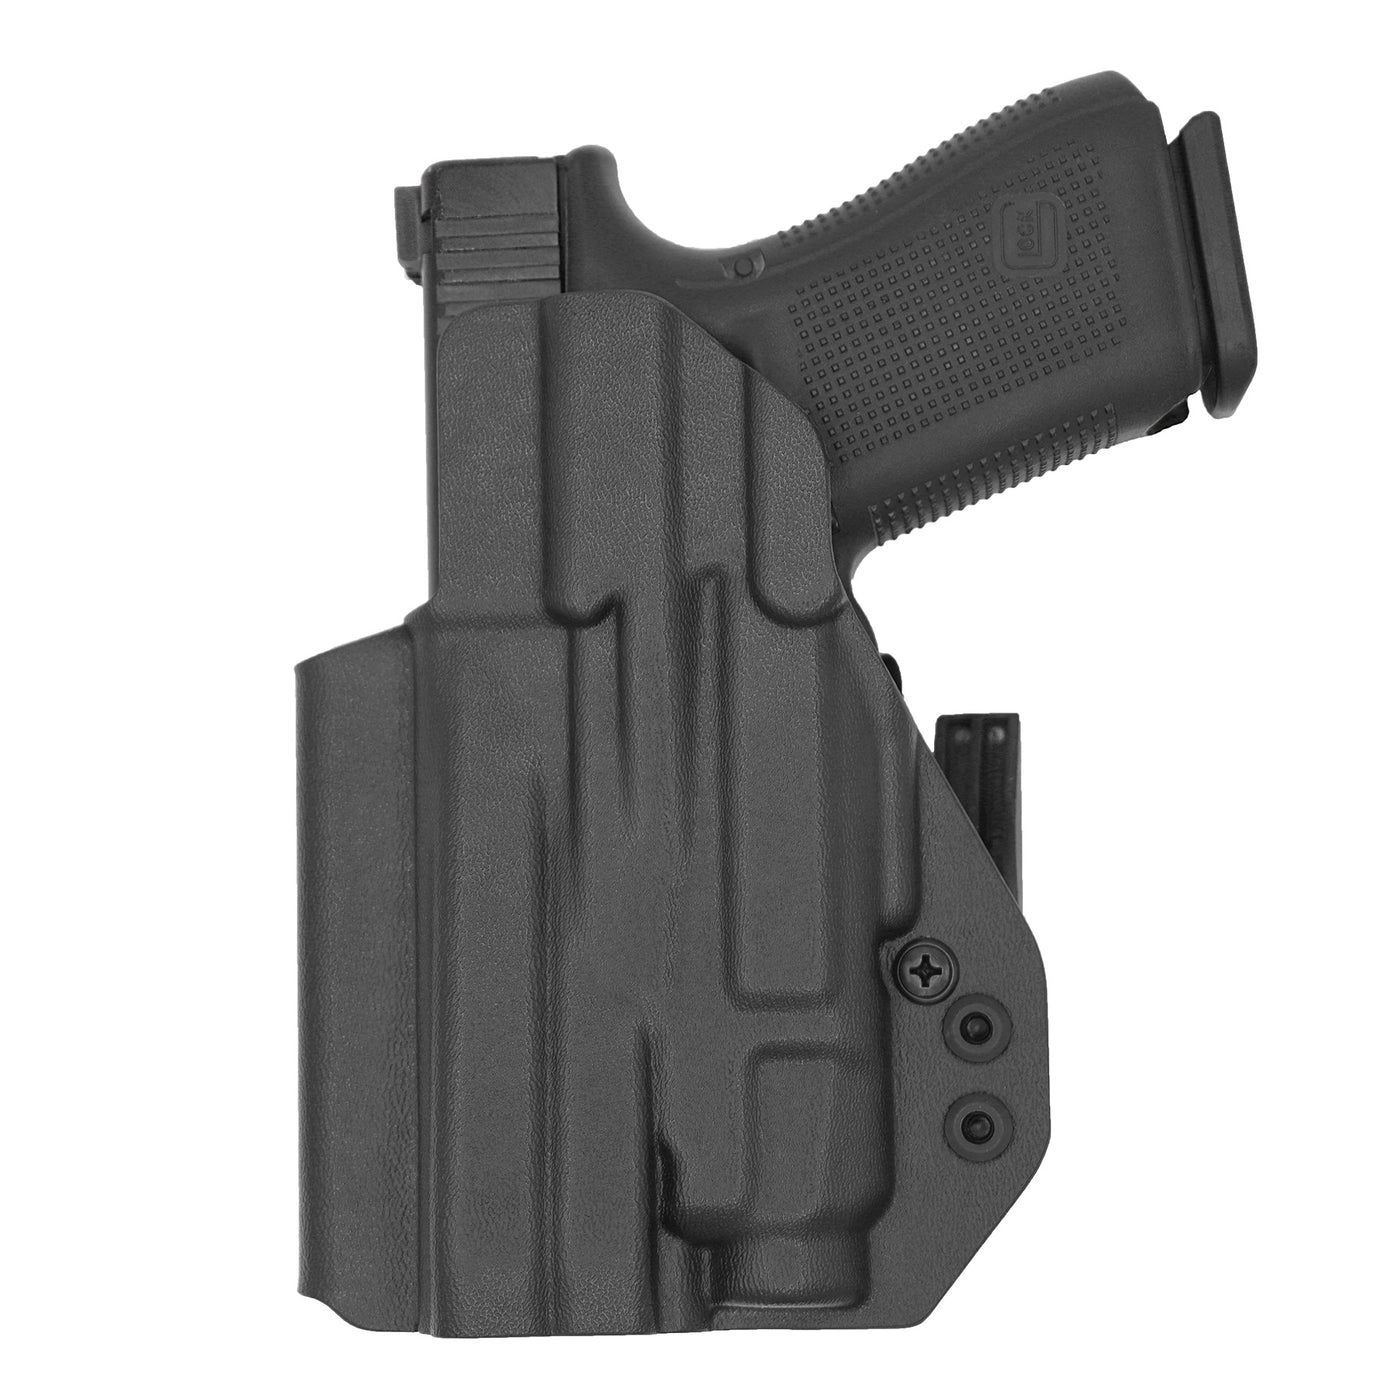 C&G Holsters quickship IWB ALPHA UPGRADE Tactical Poly80 c/v2 Streamlight TLR7/a in holstered position back view